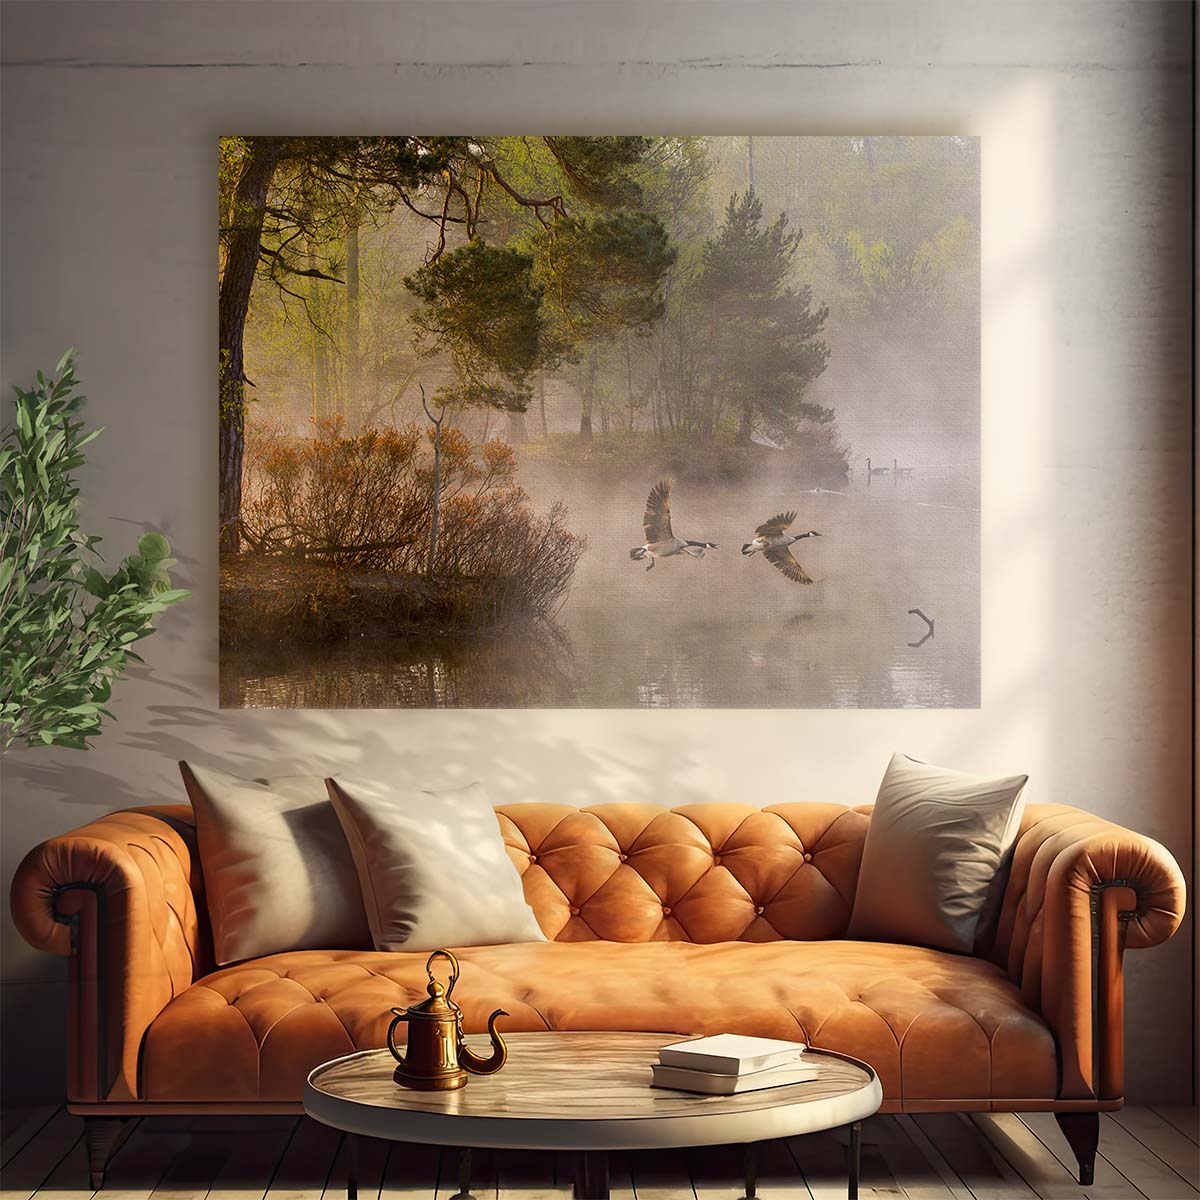 Misty Autumn Flight Geese Over Dutch Lake Wall Art by Luxuriance Designs. Made in USA.